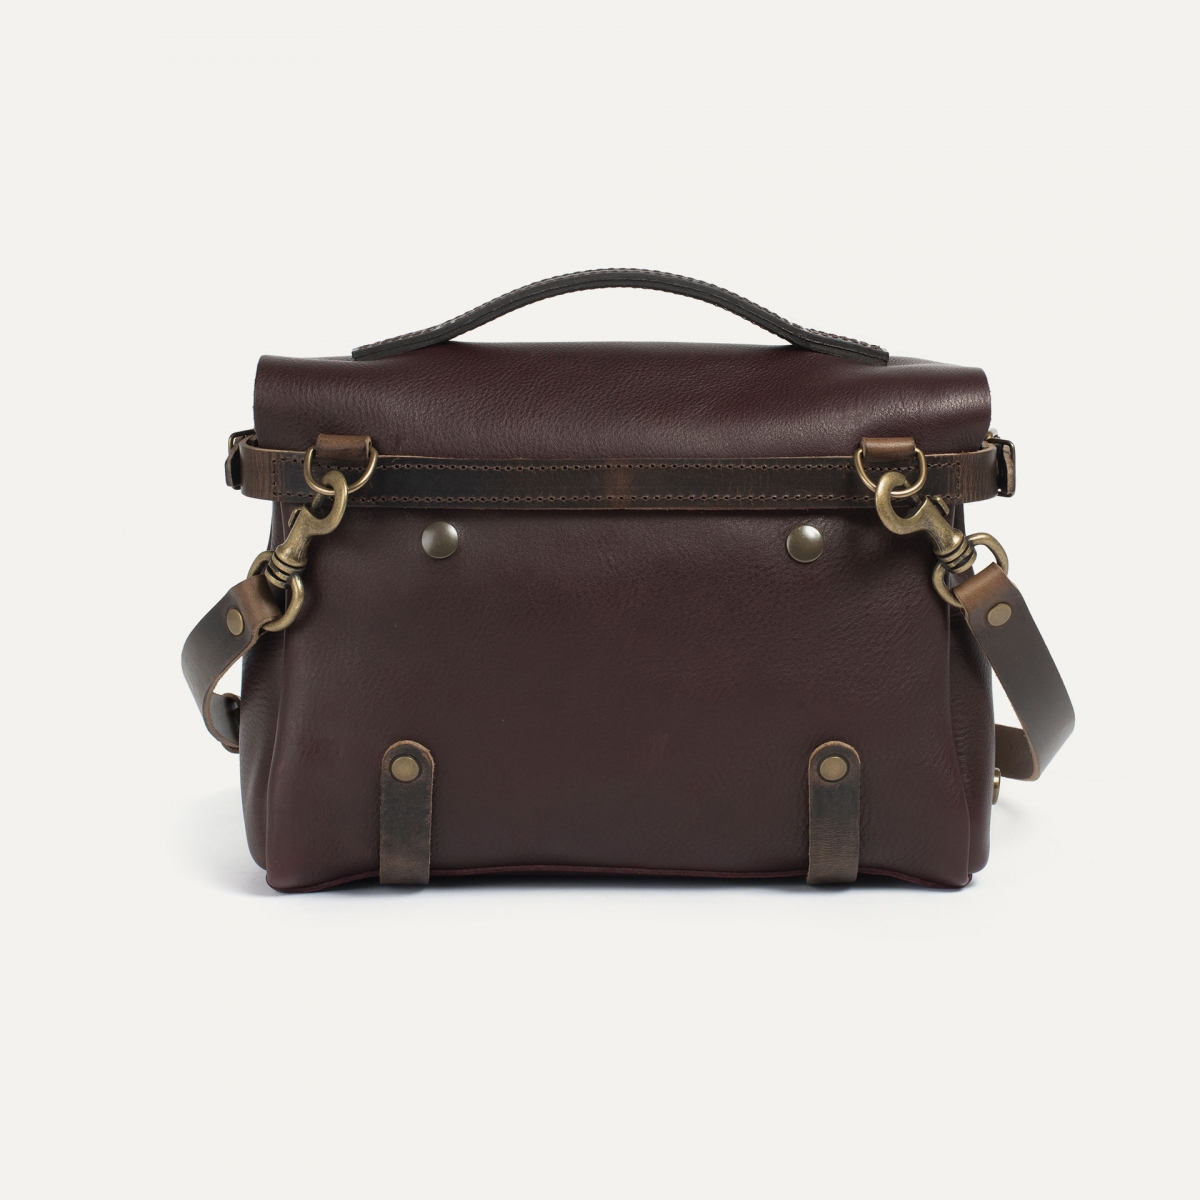 Eclair Postman bag | Leather satchel for Men and Women | Made in France